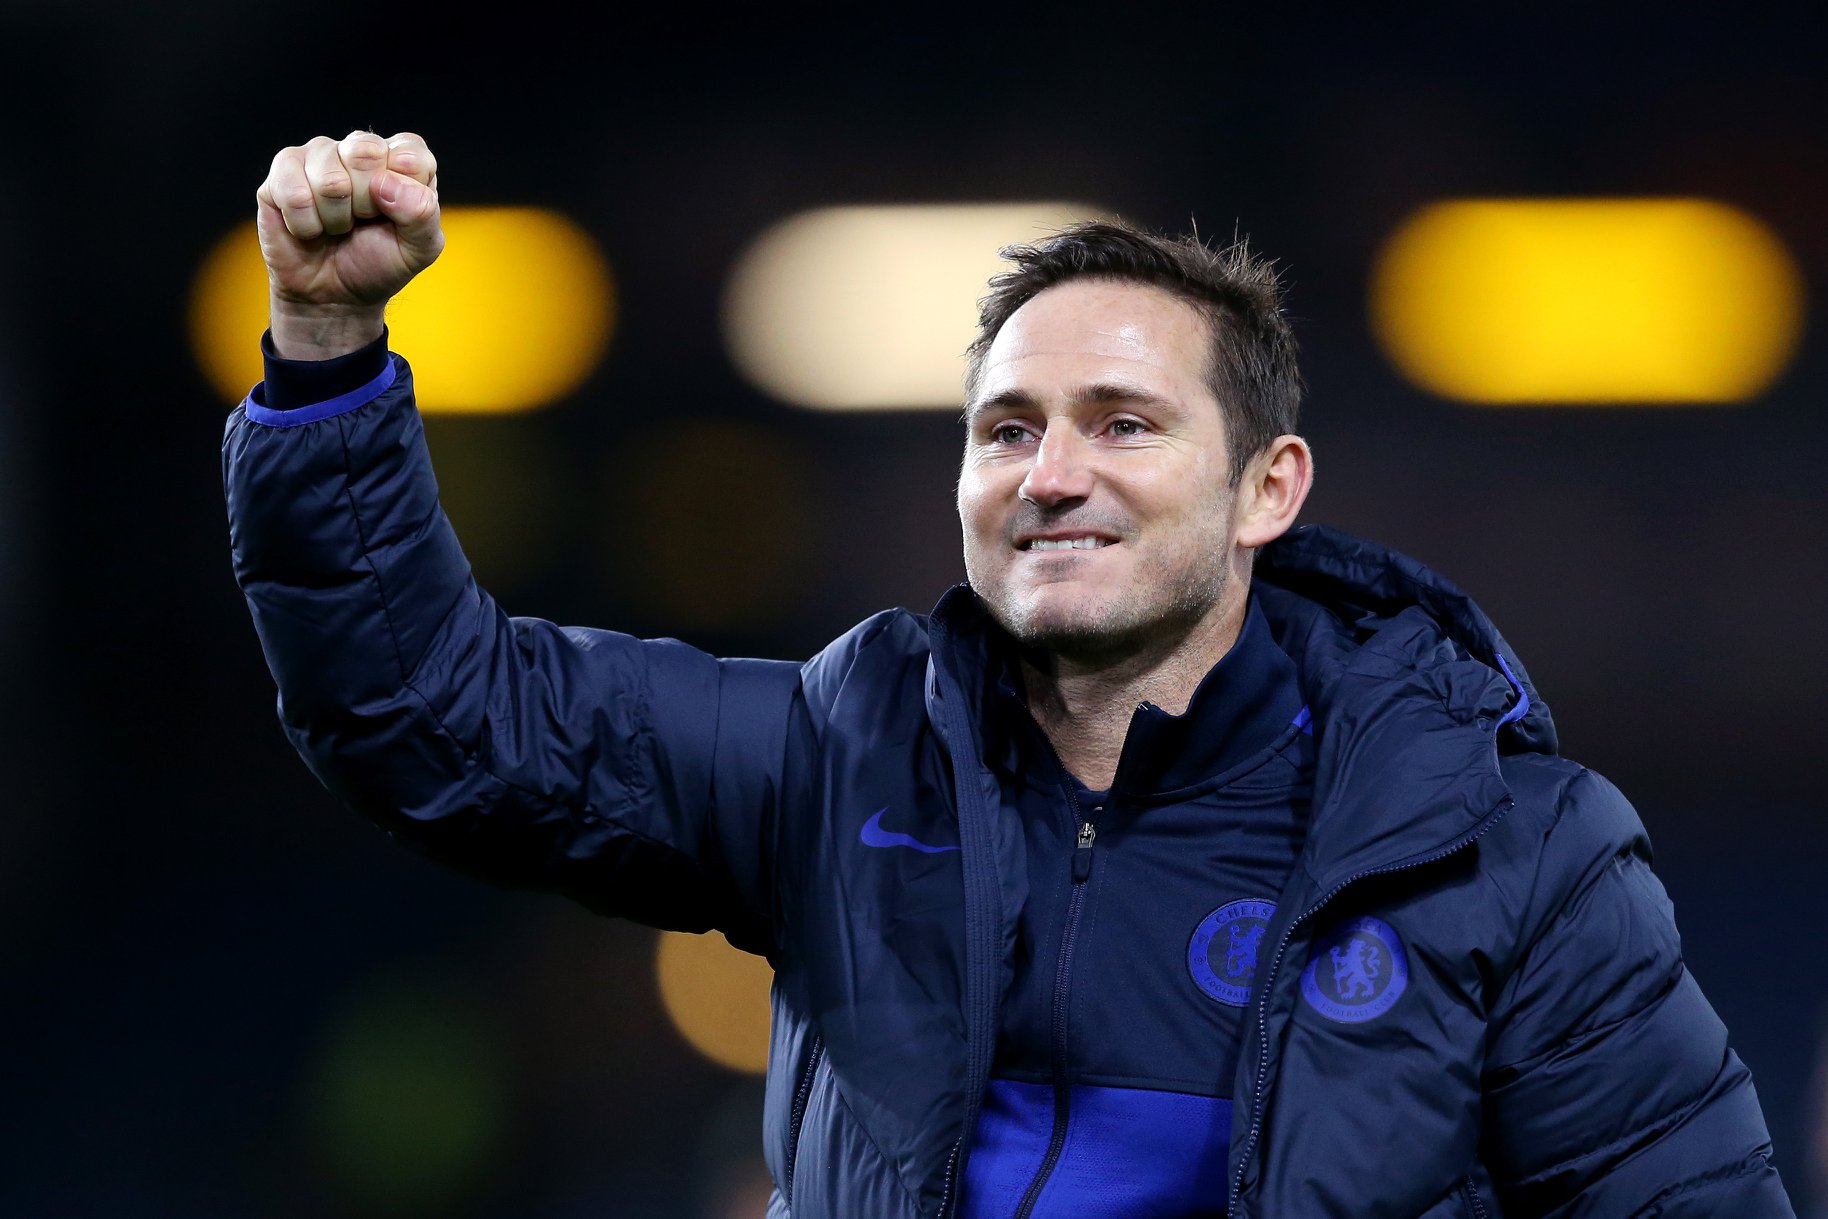 'You can replay that in 10 years. It wouldn't happen': Chelsea boss Frank Lampard insists he would NEVER manage Tottenham - Bóng Đá